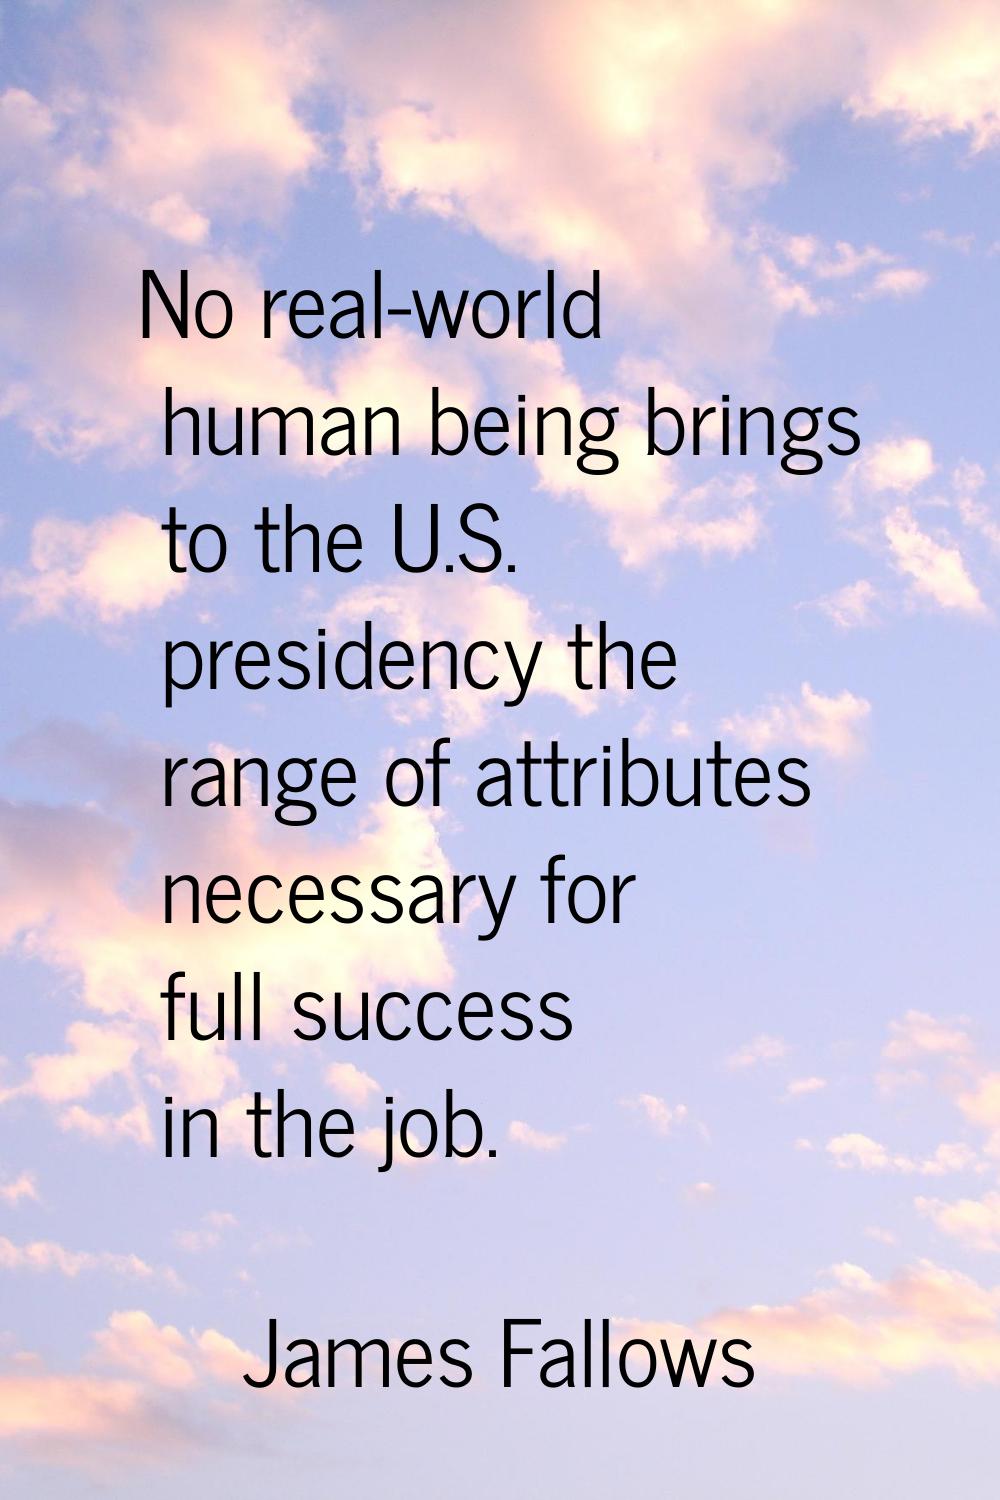 No real-world human being brings to the U.S. presidency the range of attributes necessary for full 